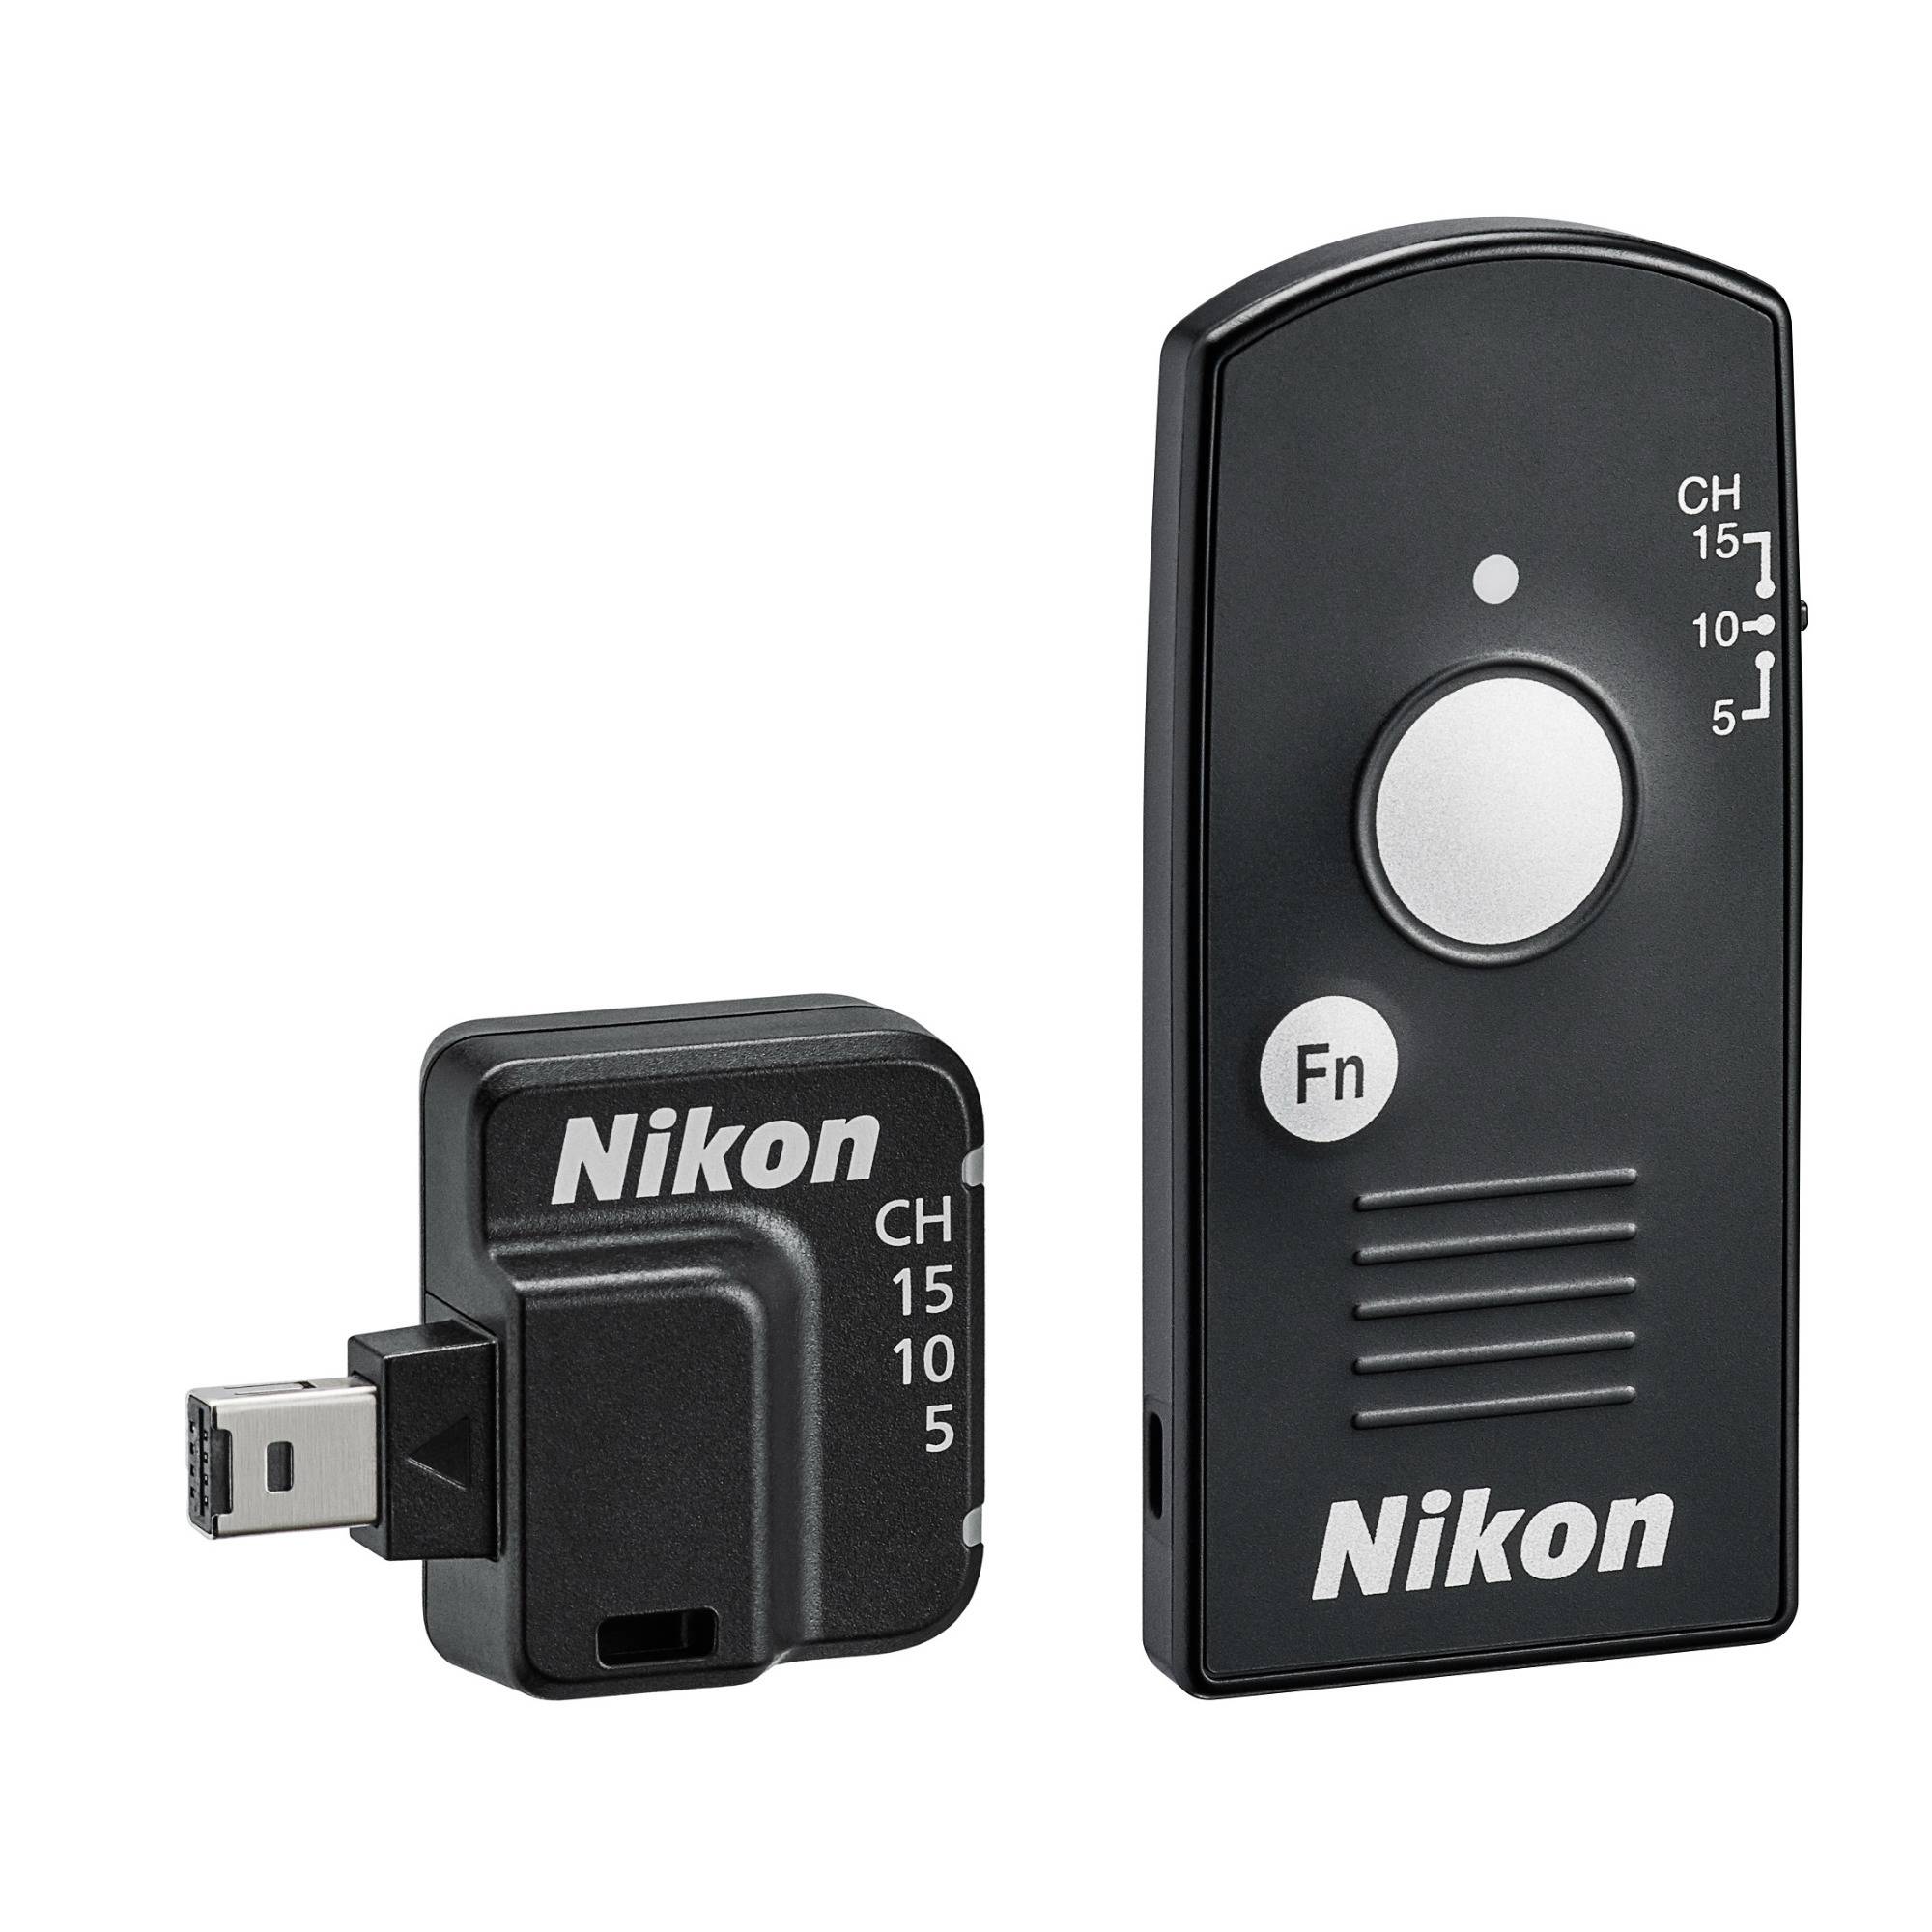 Nikon WR-R11b/WR-T10 Wireless Remote Controller Set for Nikon Cameras with Accessory Terminal